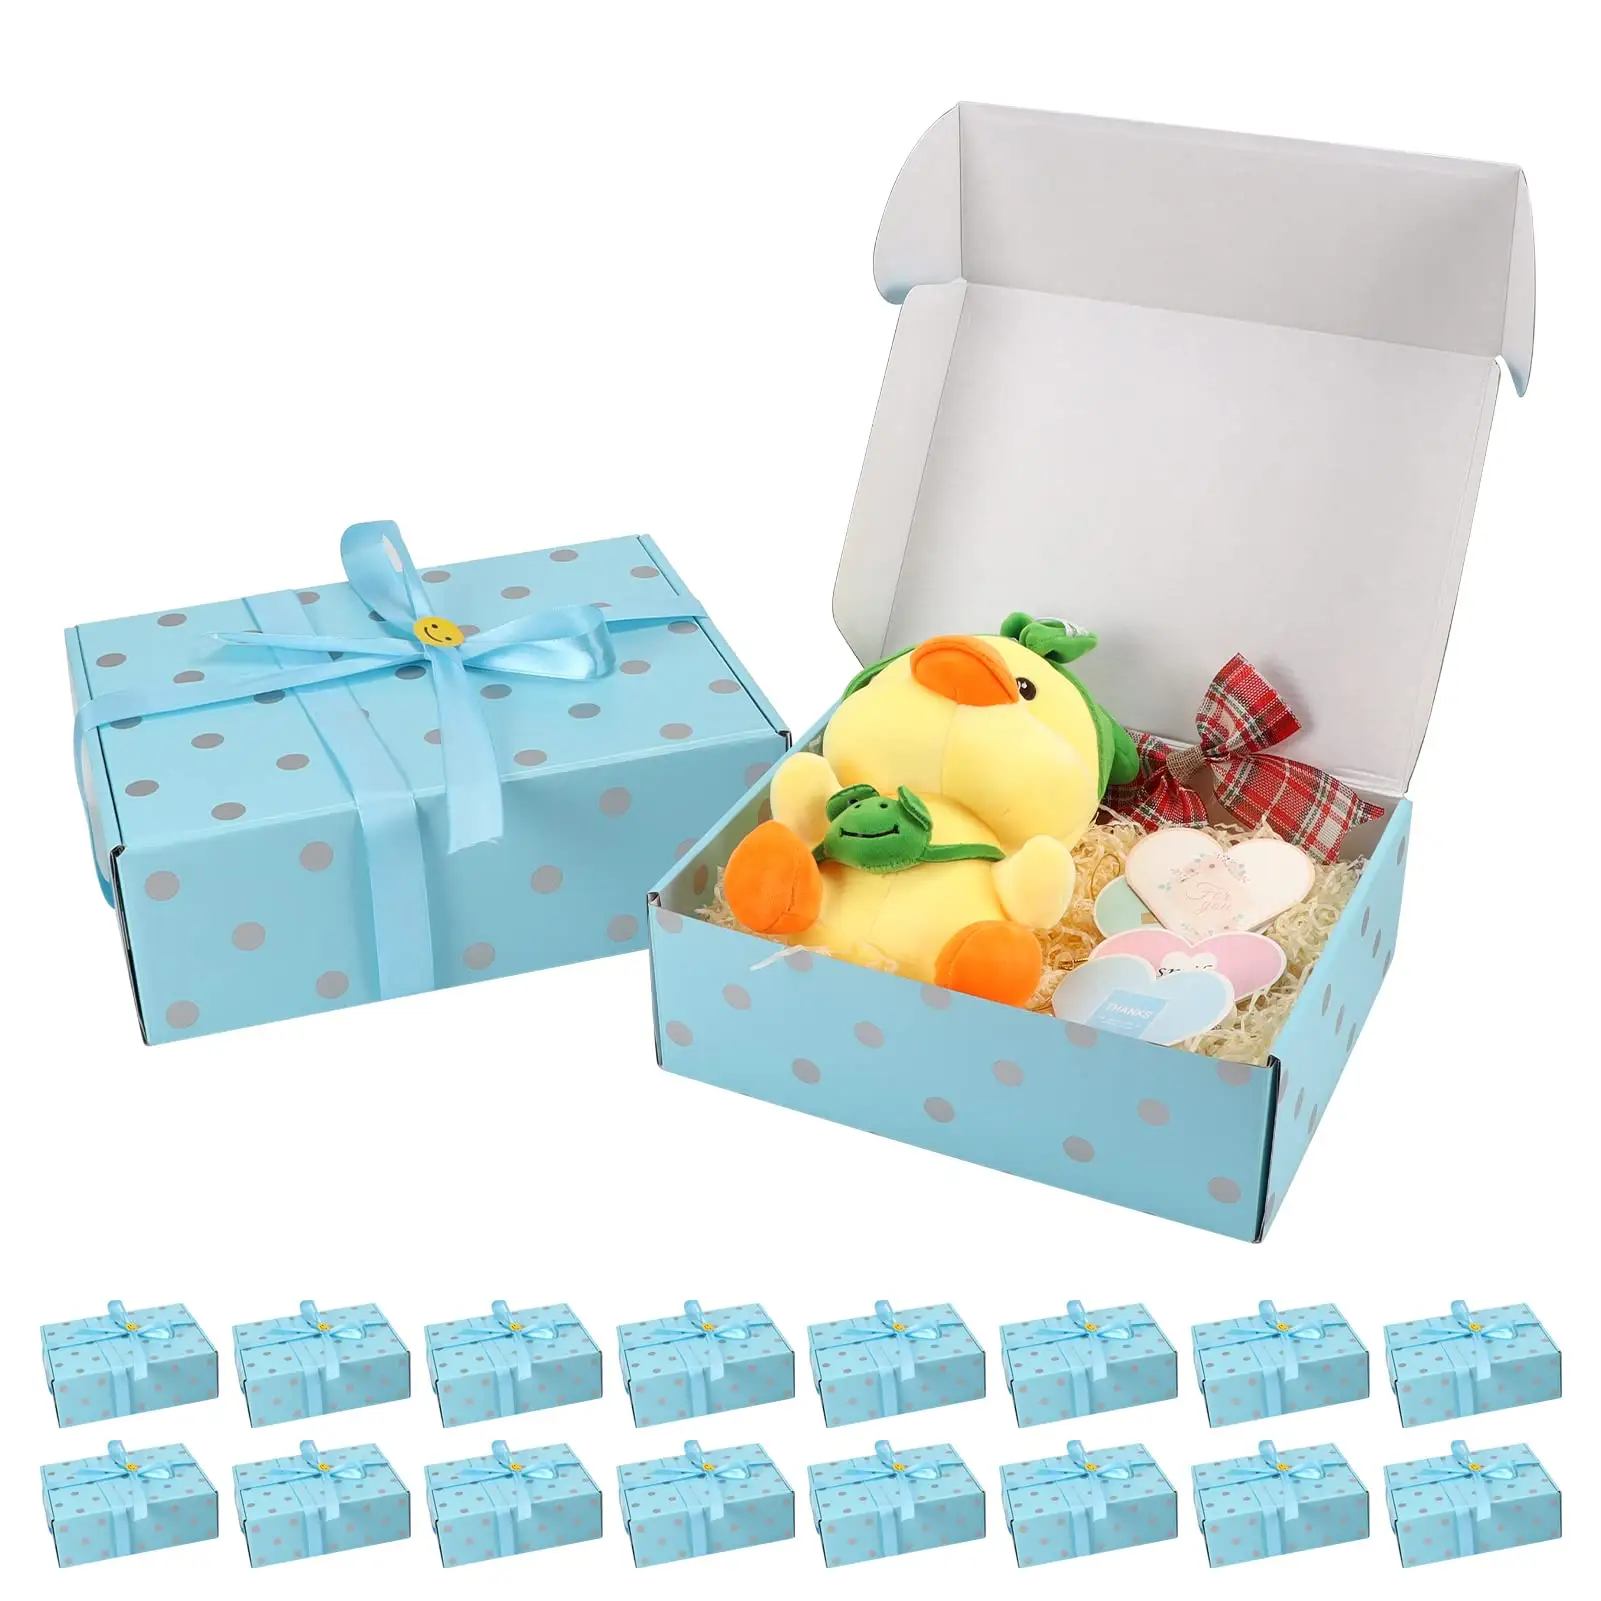 jewlery box packaging gift box packaging luxury presentation gift boxes